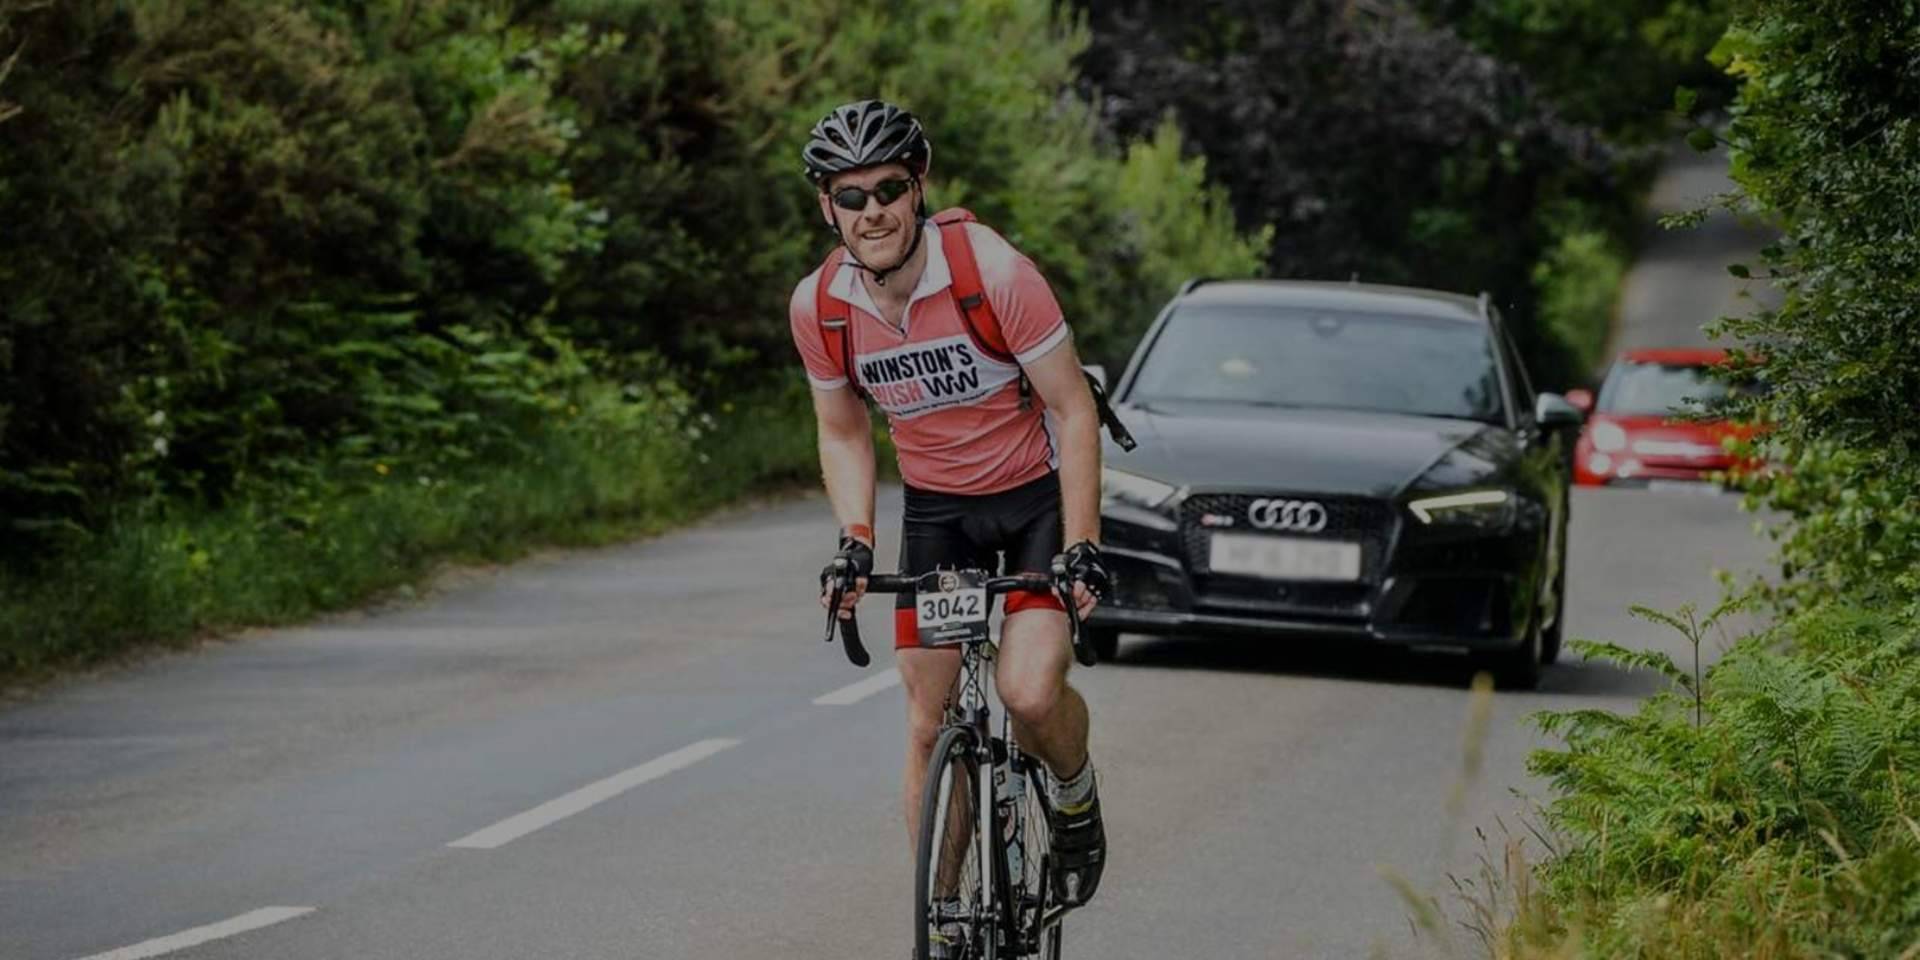 Cyclist in Winston's Wish top doing London to Brighton Cycle